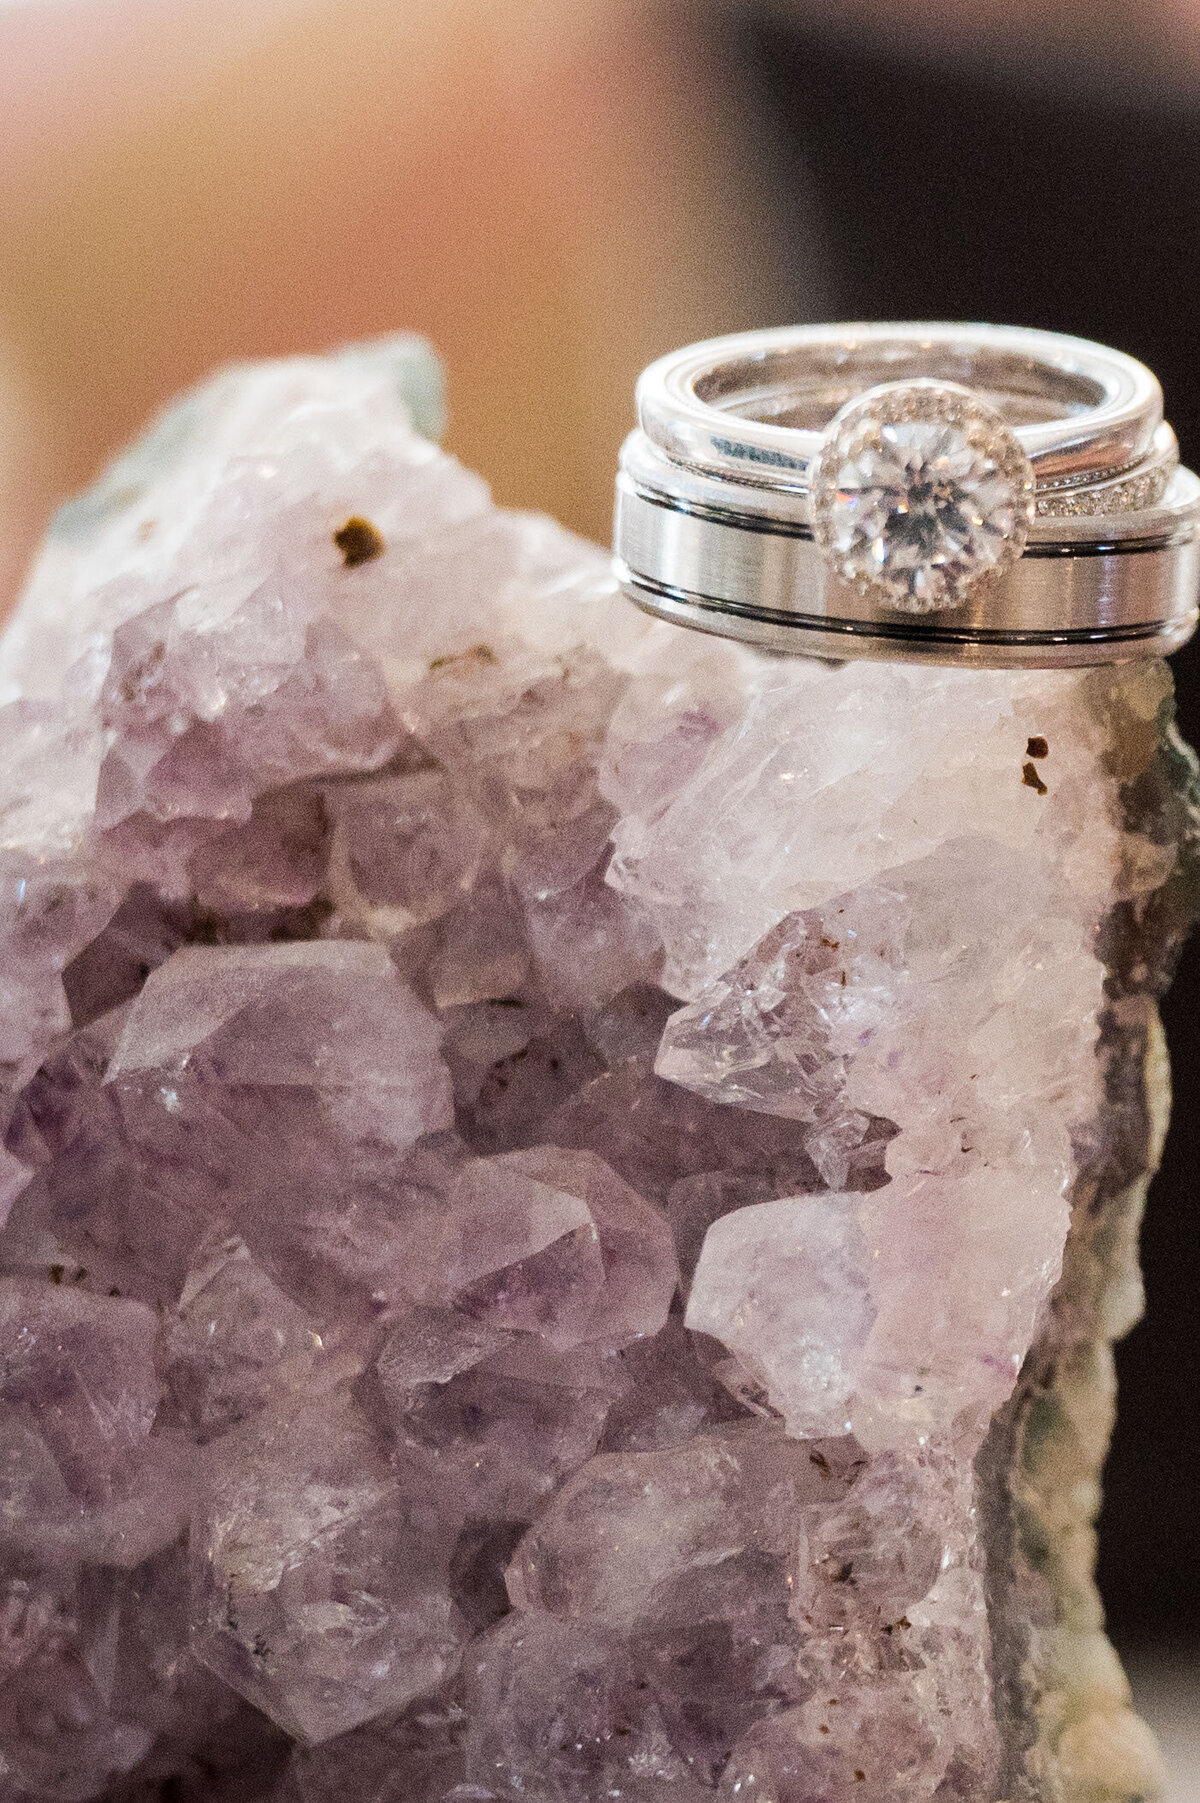 A pair of wedding rings rests on an ornate, jagged purple crystal.